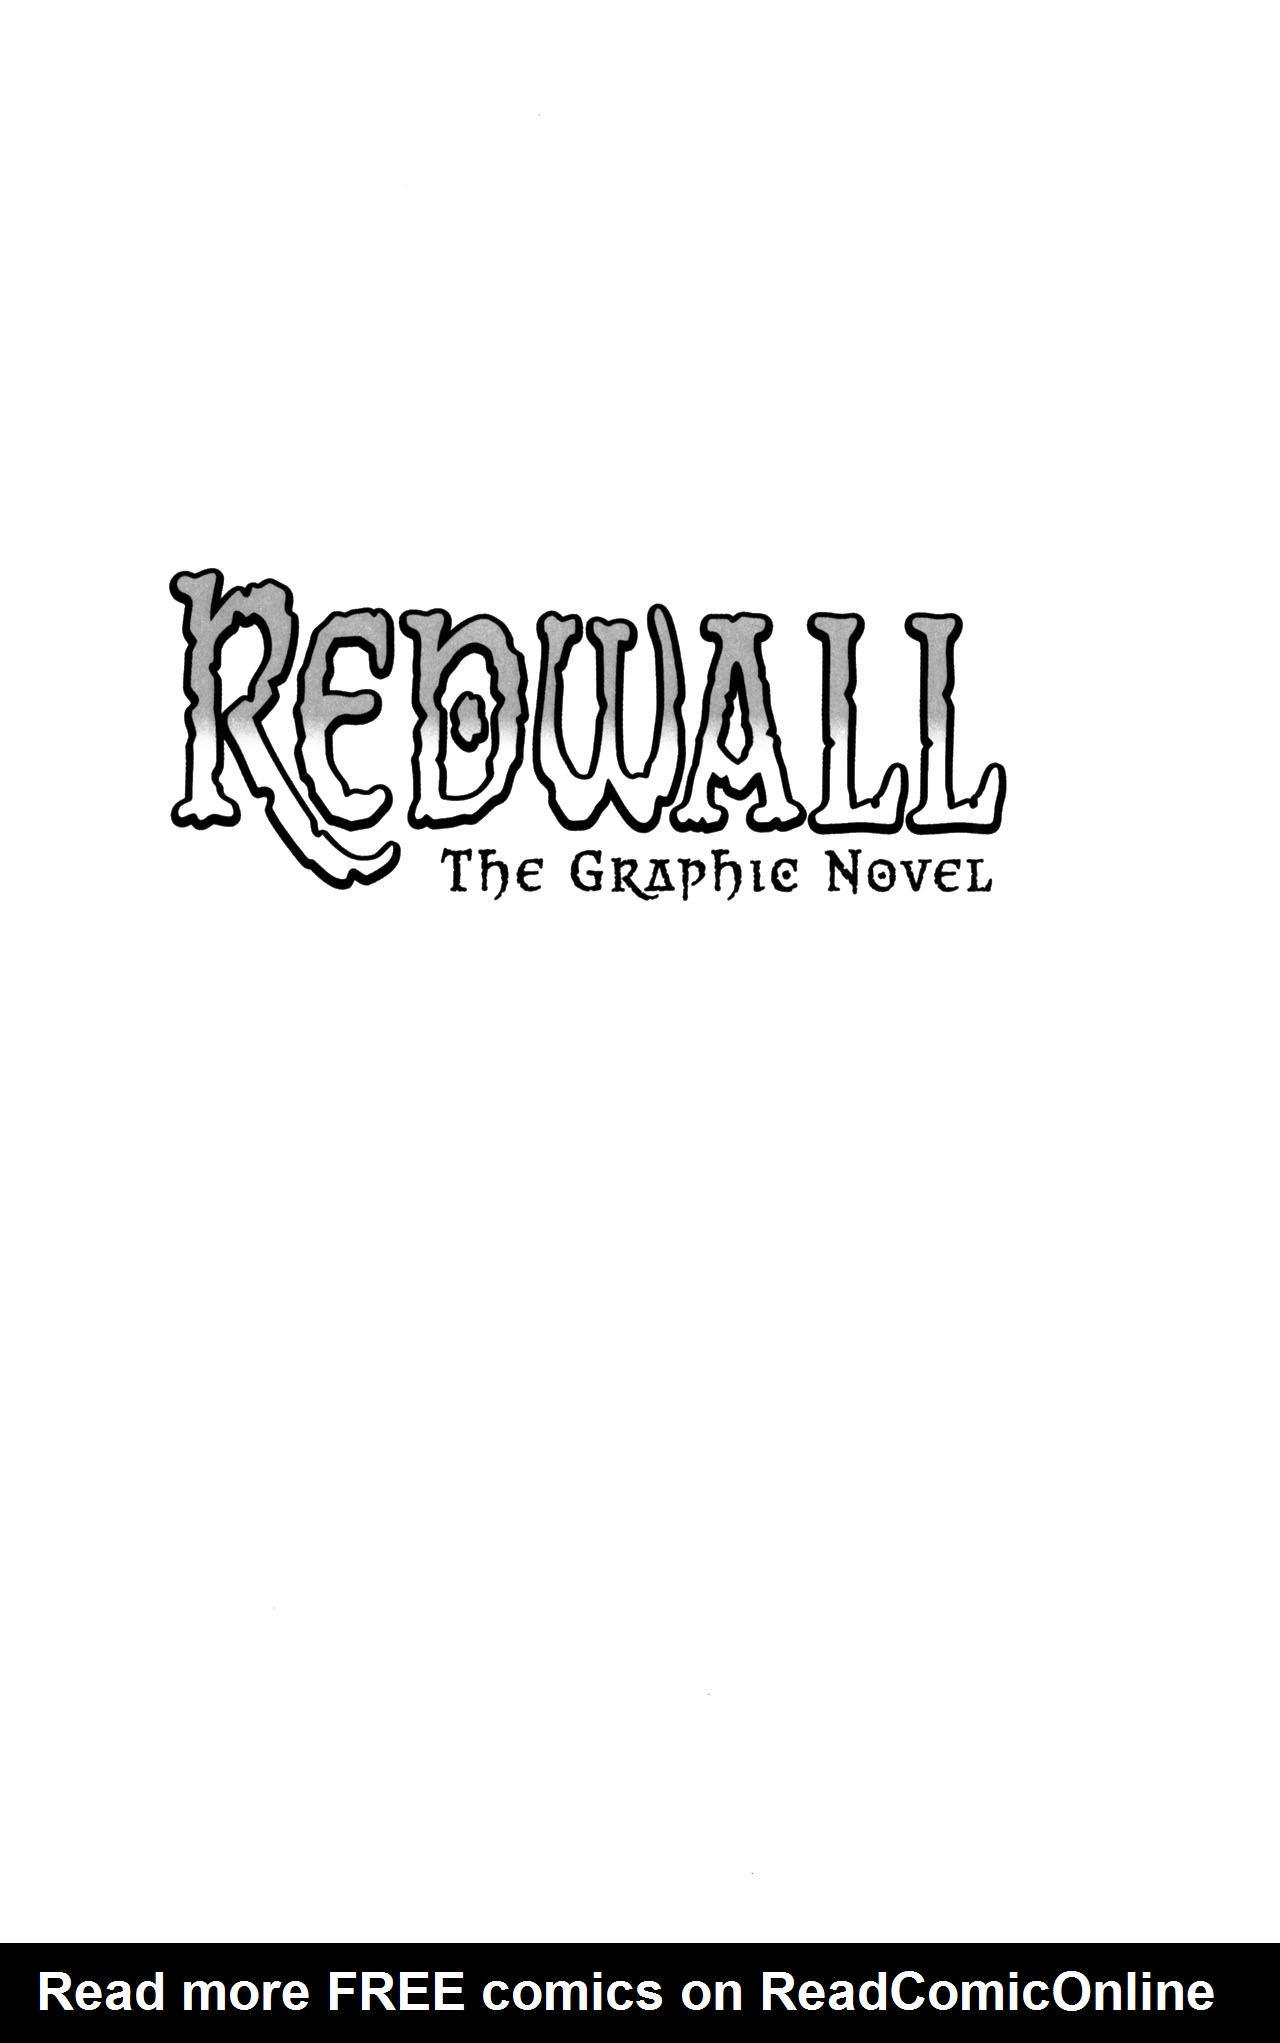 Read online Redwall: The Graphic Novel comic -  Issue # TPB - 3